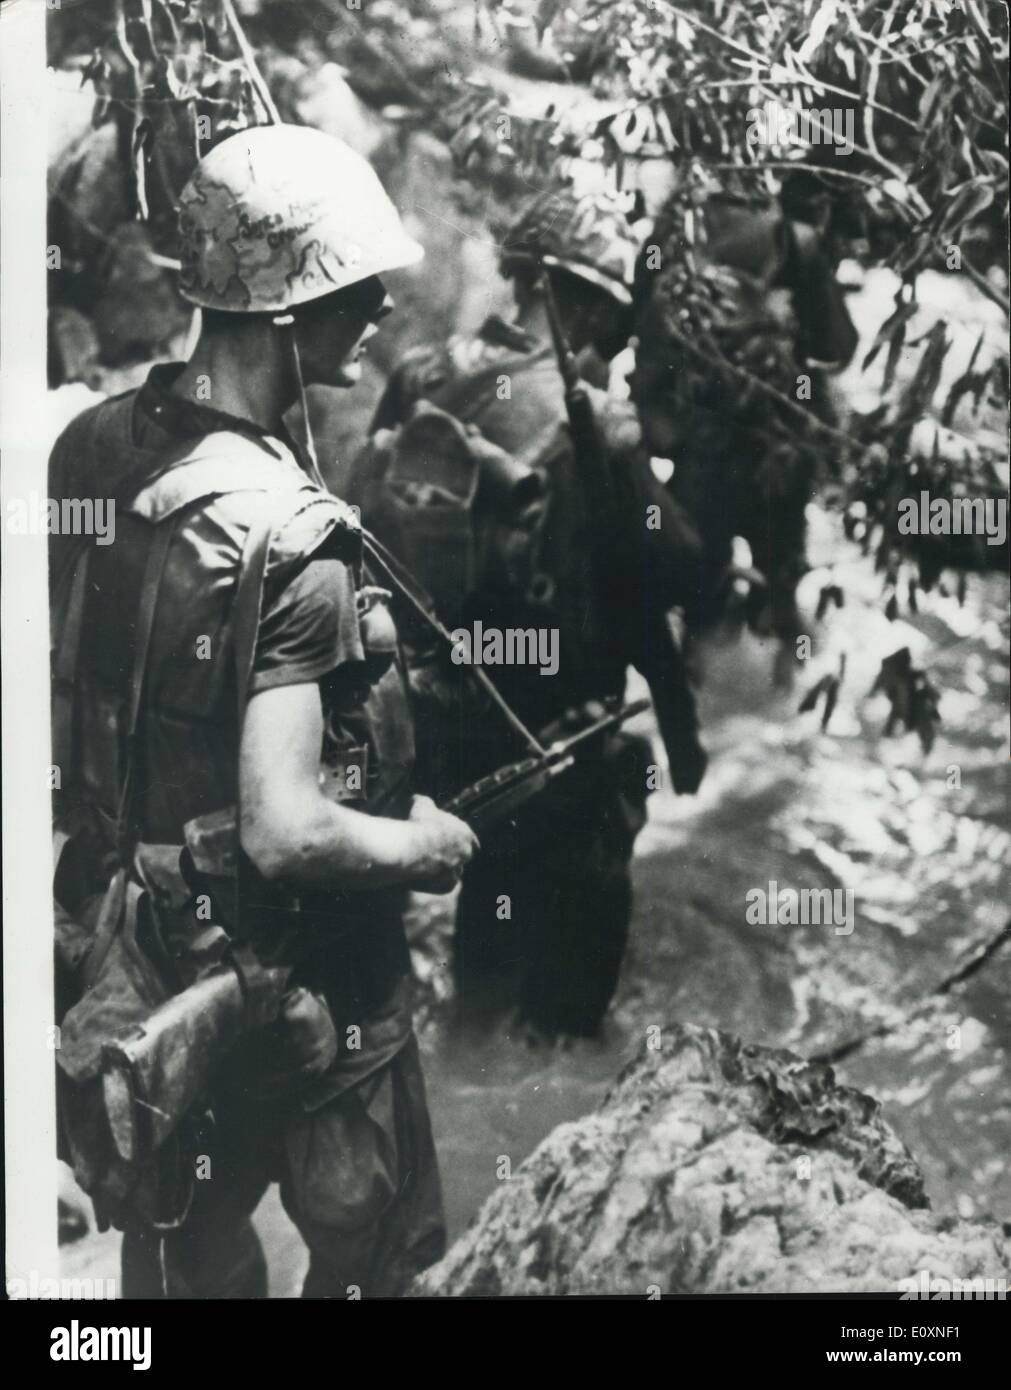 May 04, 1967 - War in Vietnam Wet Patrol: American Marines wade through a Jungle stream in search of Vist cong using the same waterway to mask their movements. The flowing water muffles movement as the infantrymen go forward on their mission. Stock Photo